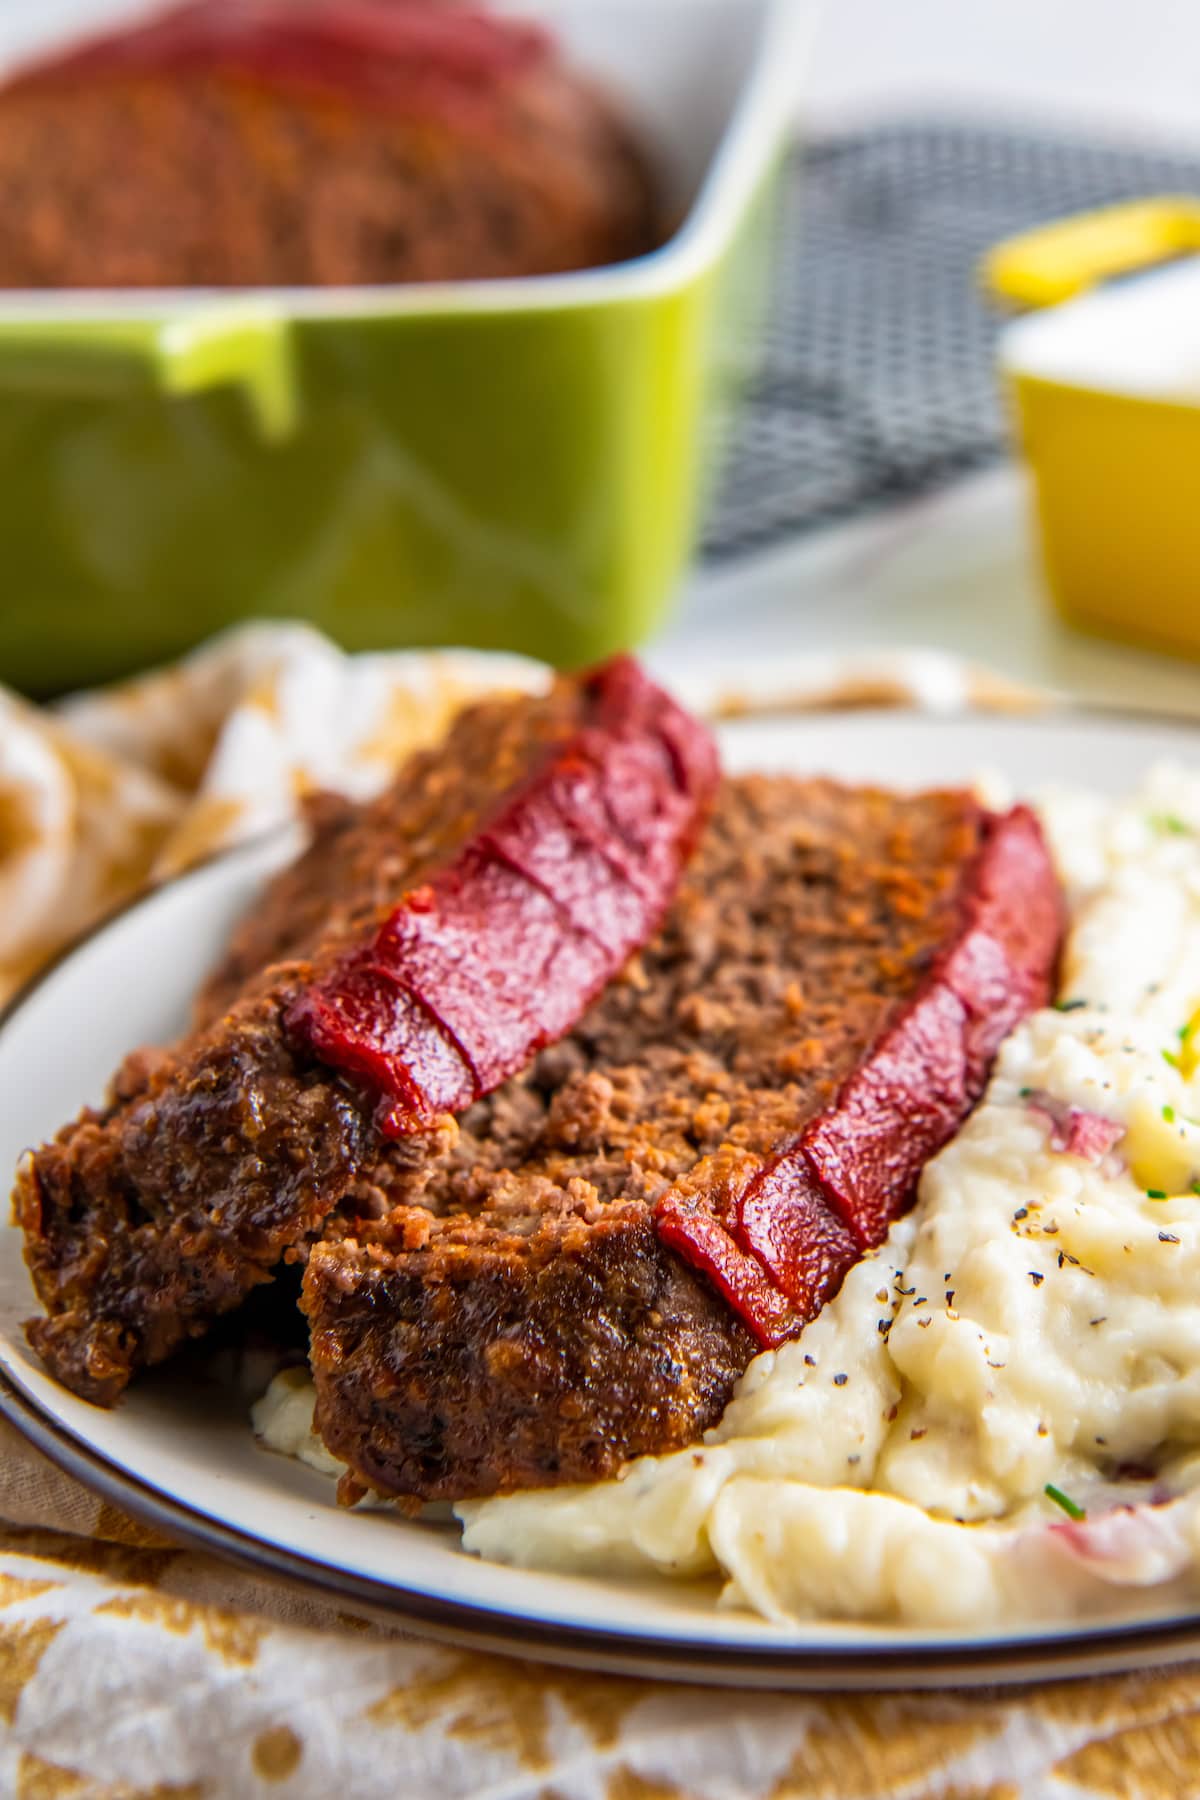 Slices of easy meatloaf and mashed potatoes.